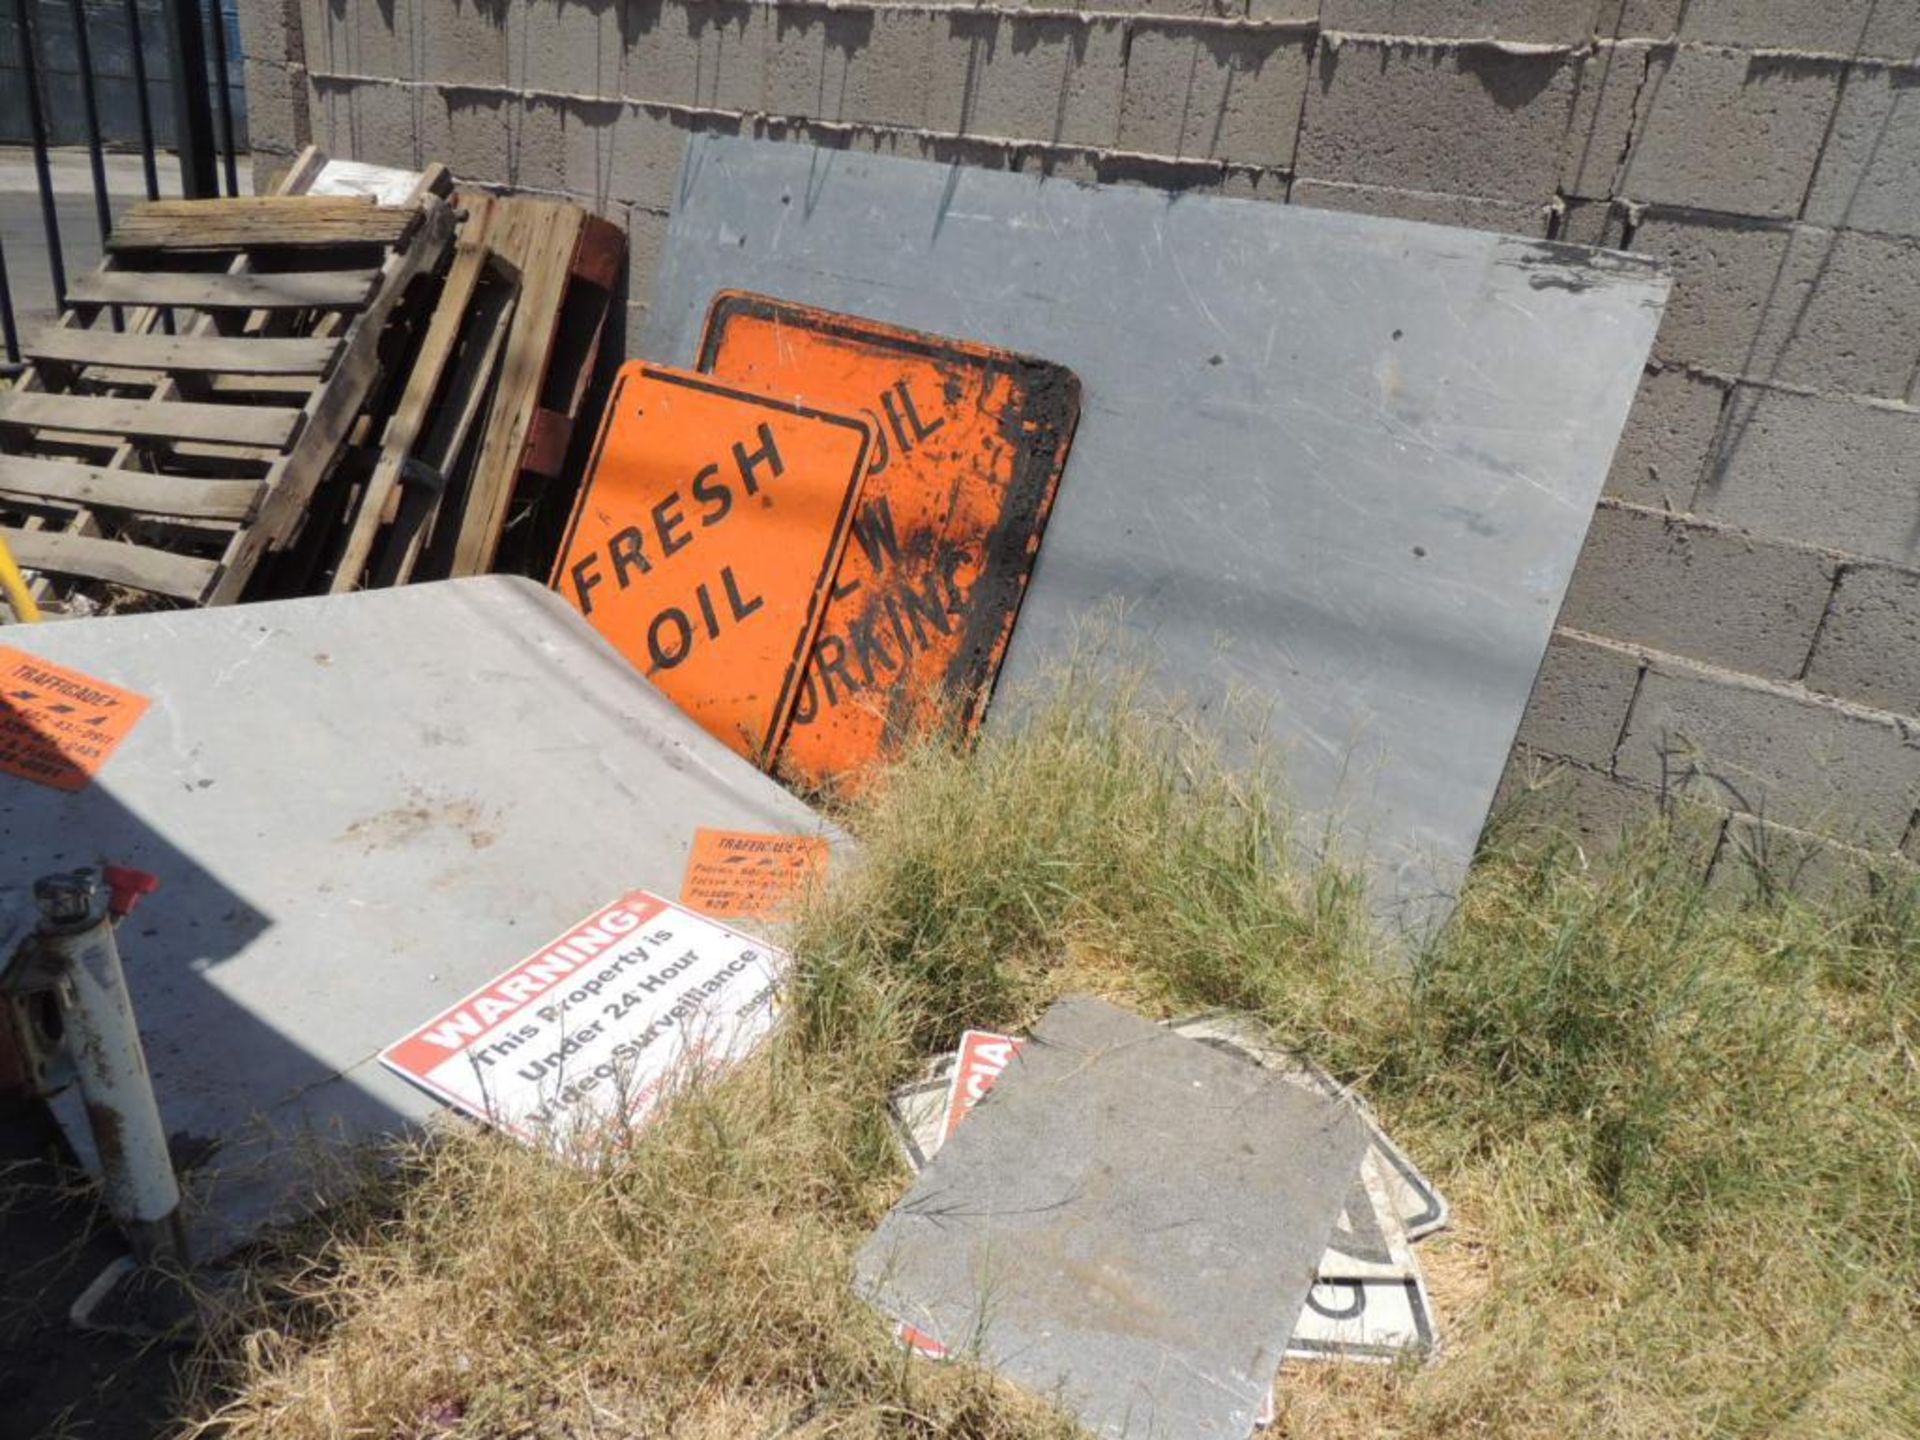 LOT: Misc. Road Signs (Yard 2), LOCATION: 2435 S. 6th Ave., Phoenix, AZ 85003 - Image 3 of 3